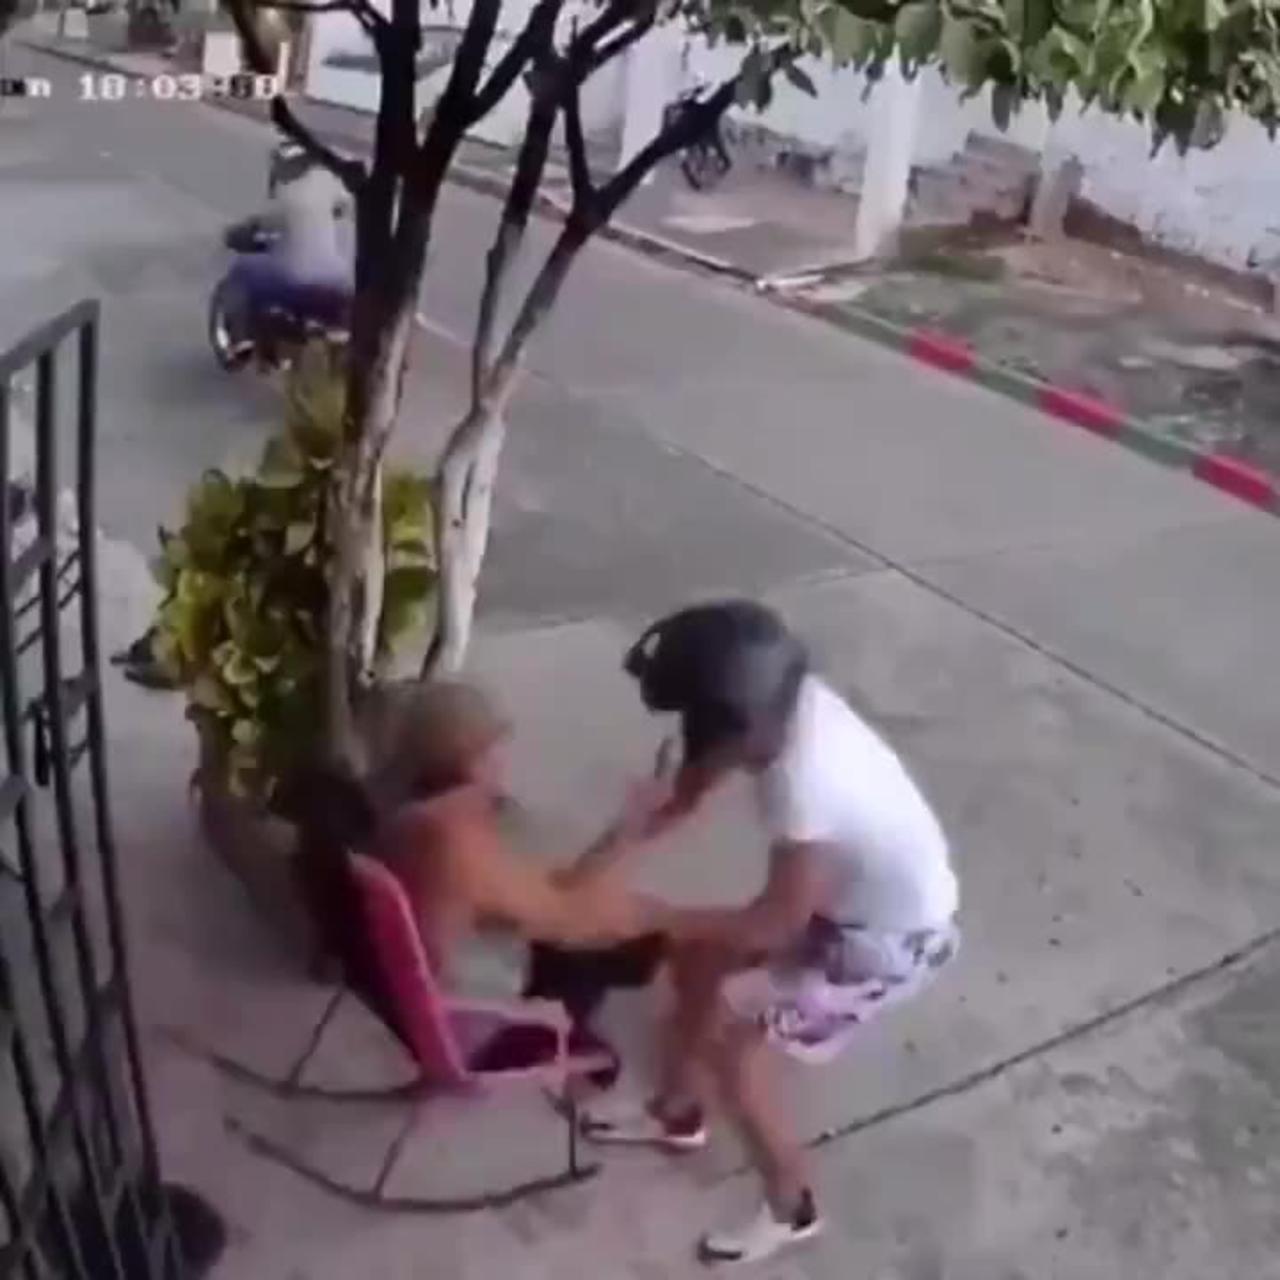 "Grandma's Brave Stand: Confronting a Thief in Broad Daylight"